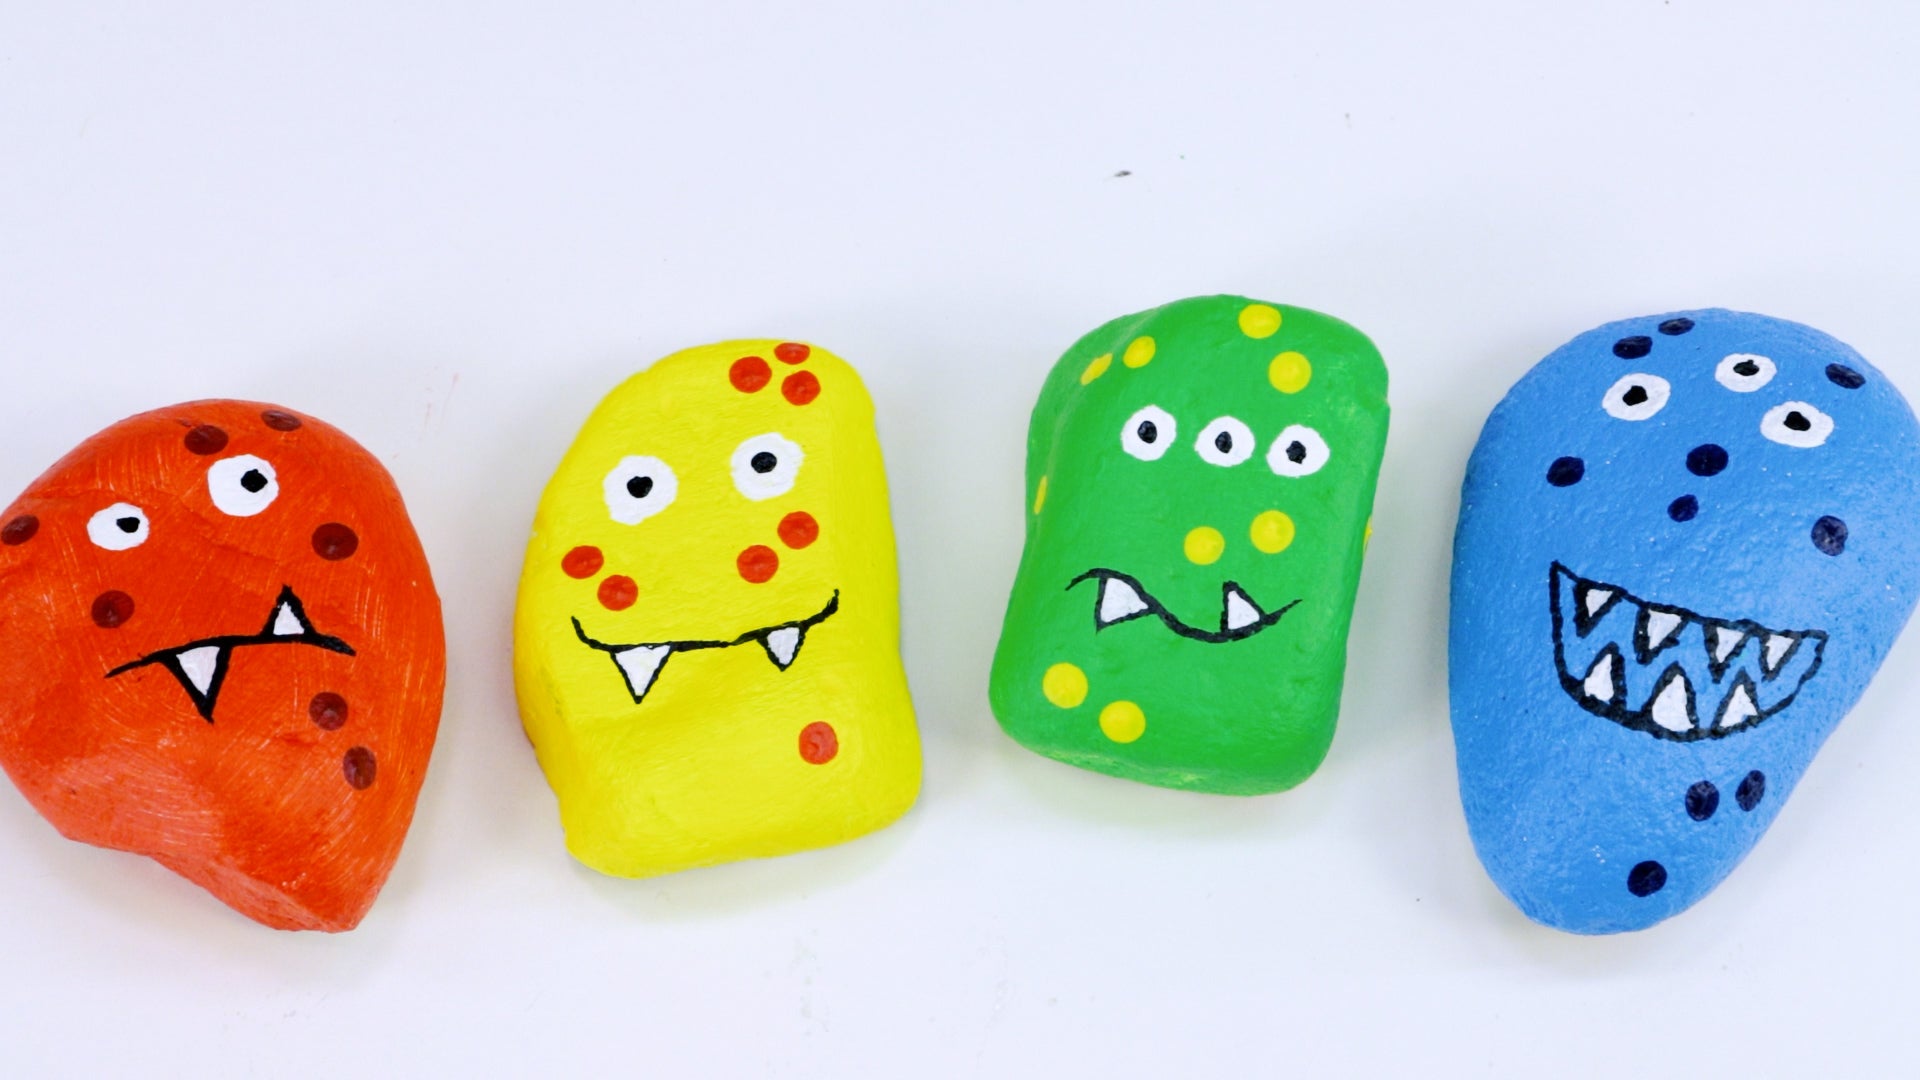 Four rocks painted to look like colourful monsters sitting side by side.